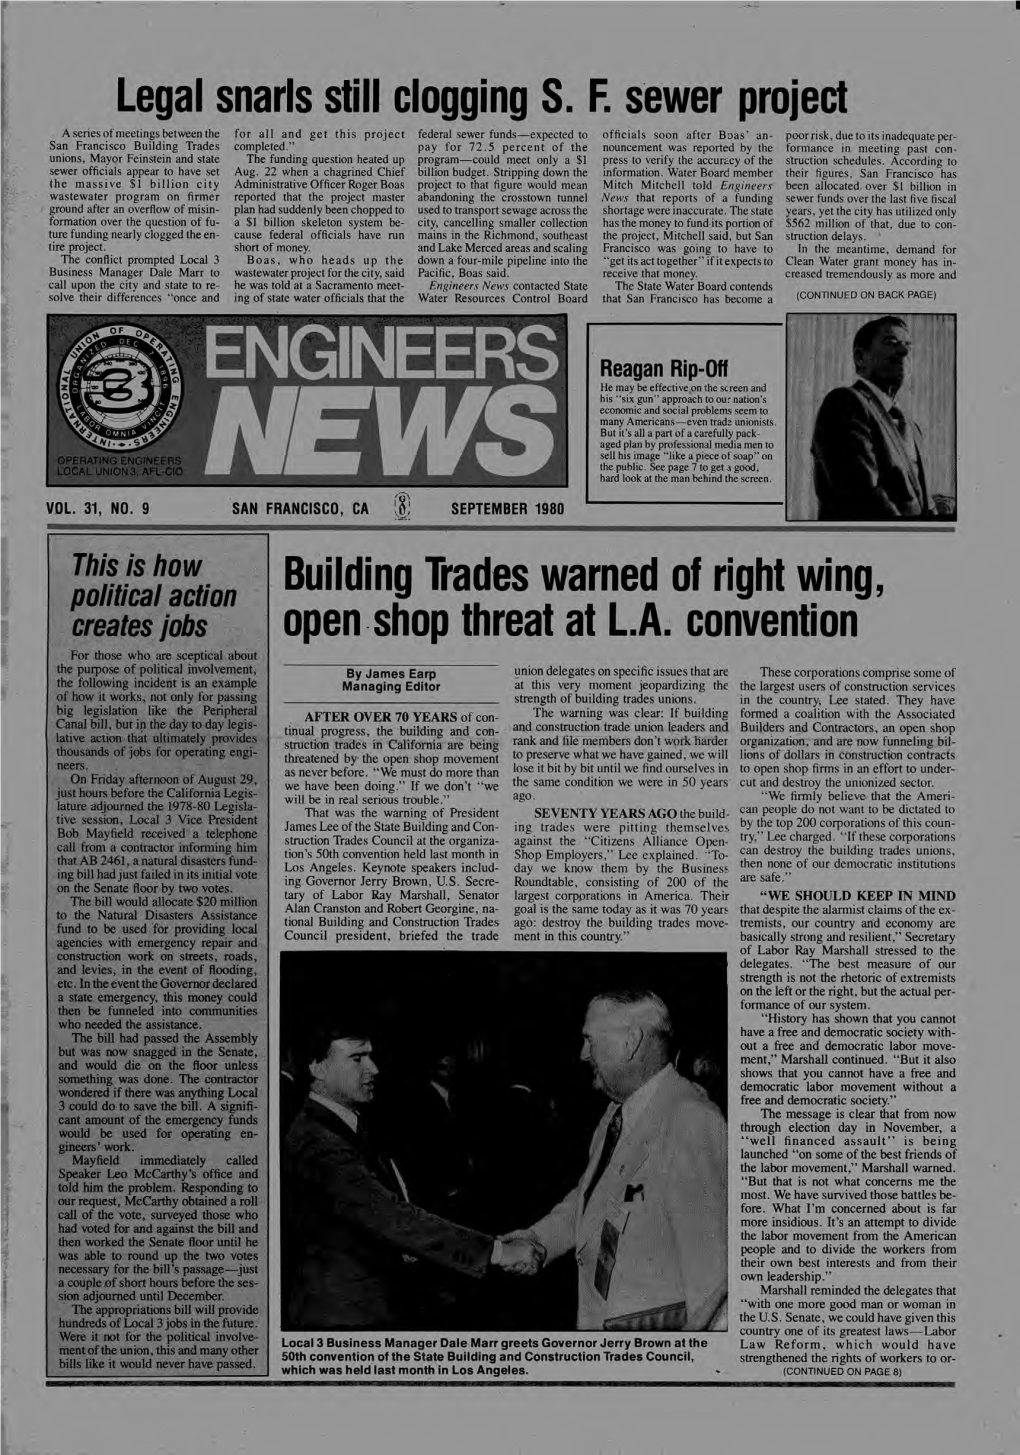 SEPTEMBER 1980 1 This Is How Political Action Building Trades Warned of Right Wing, Creates Jobs Open Shop Threat at L.A